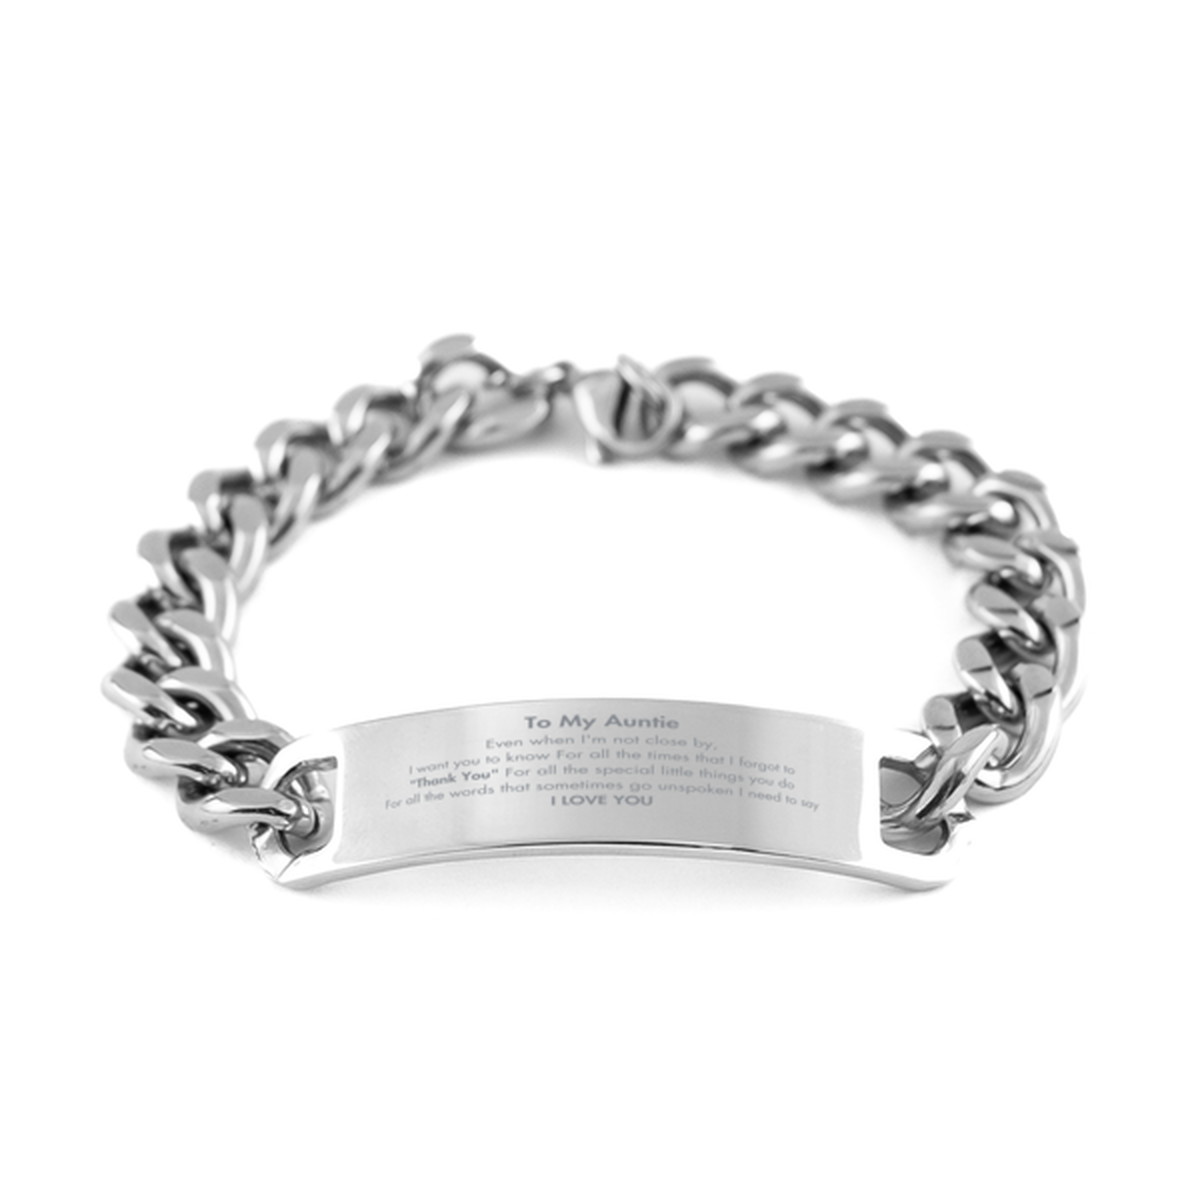 Thank You Gifts for Auntie, Keepsake Cuban Chain Stainless Steel Bracelet Gifts for Auntie Birthday Mother's day Father's Day Auntie For all the words That sometimes go unspoken I need to say I LOVE YOU